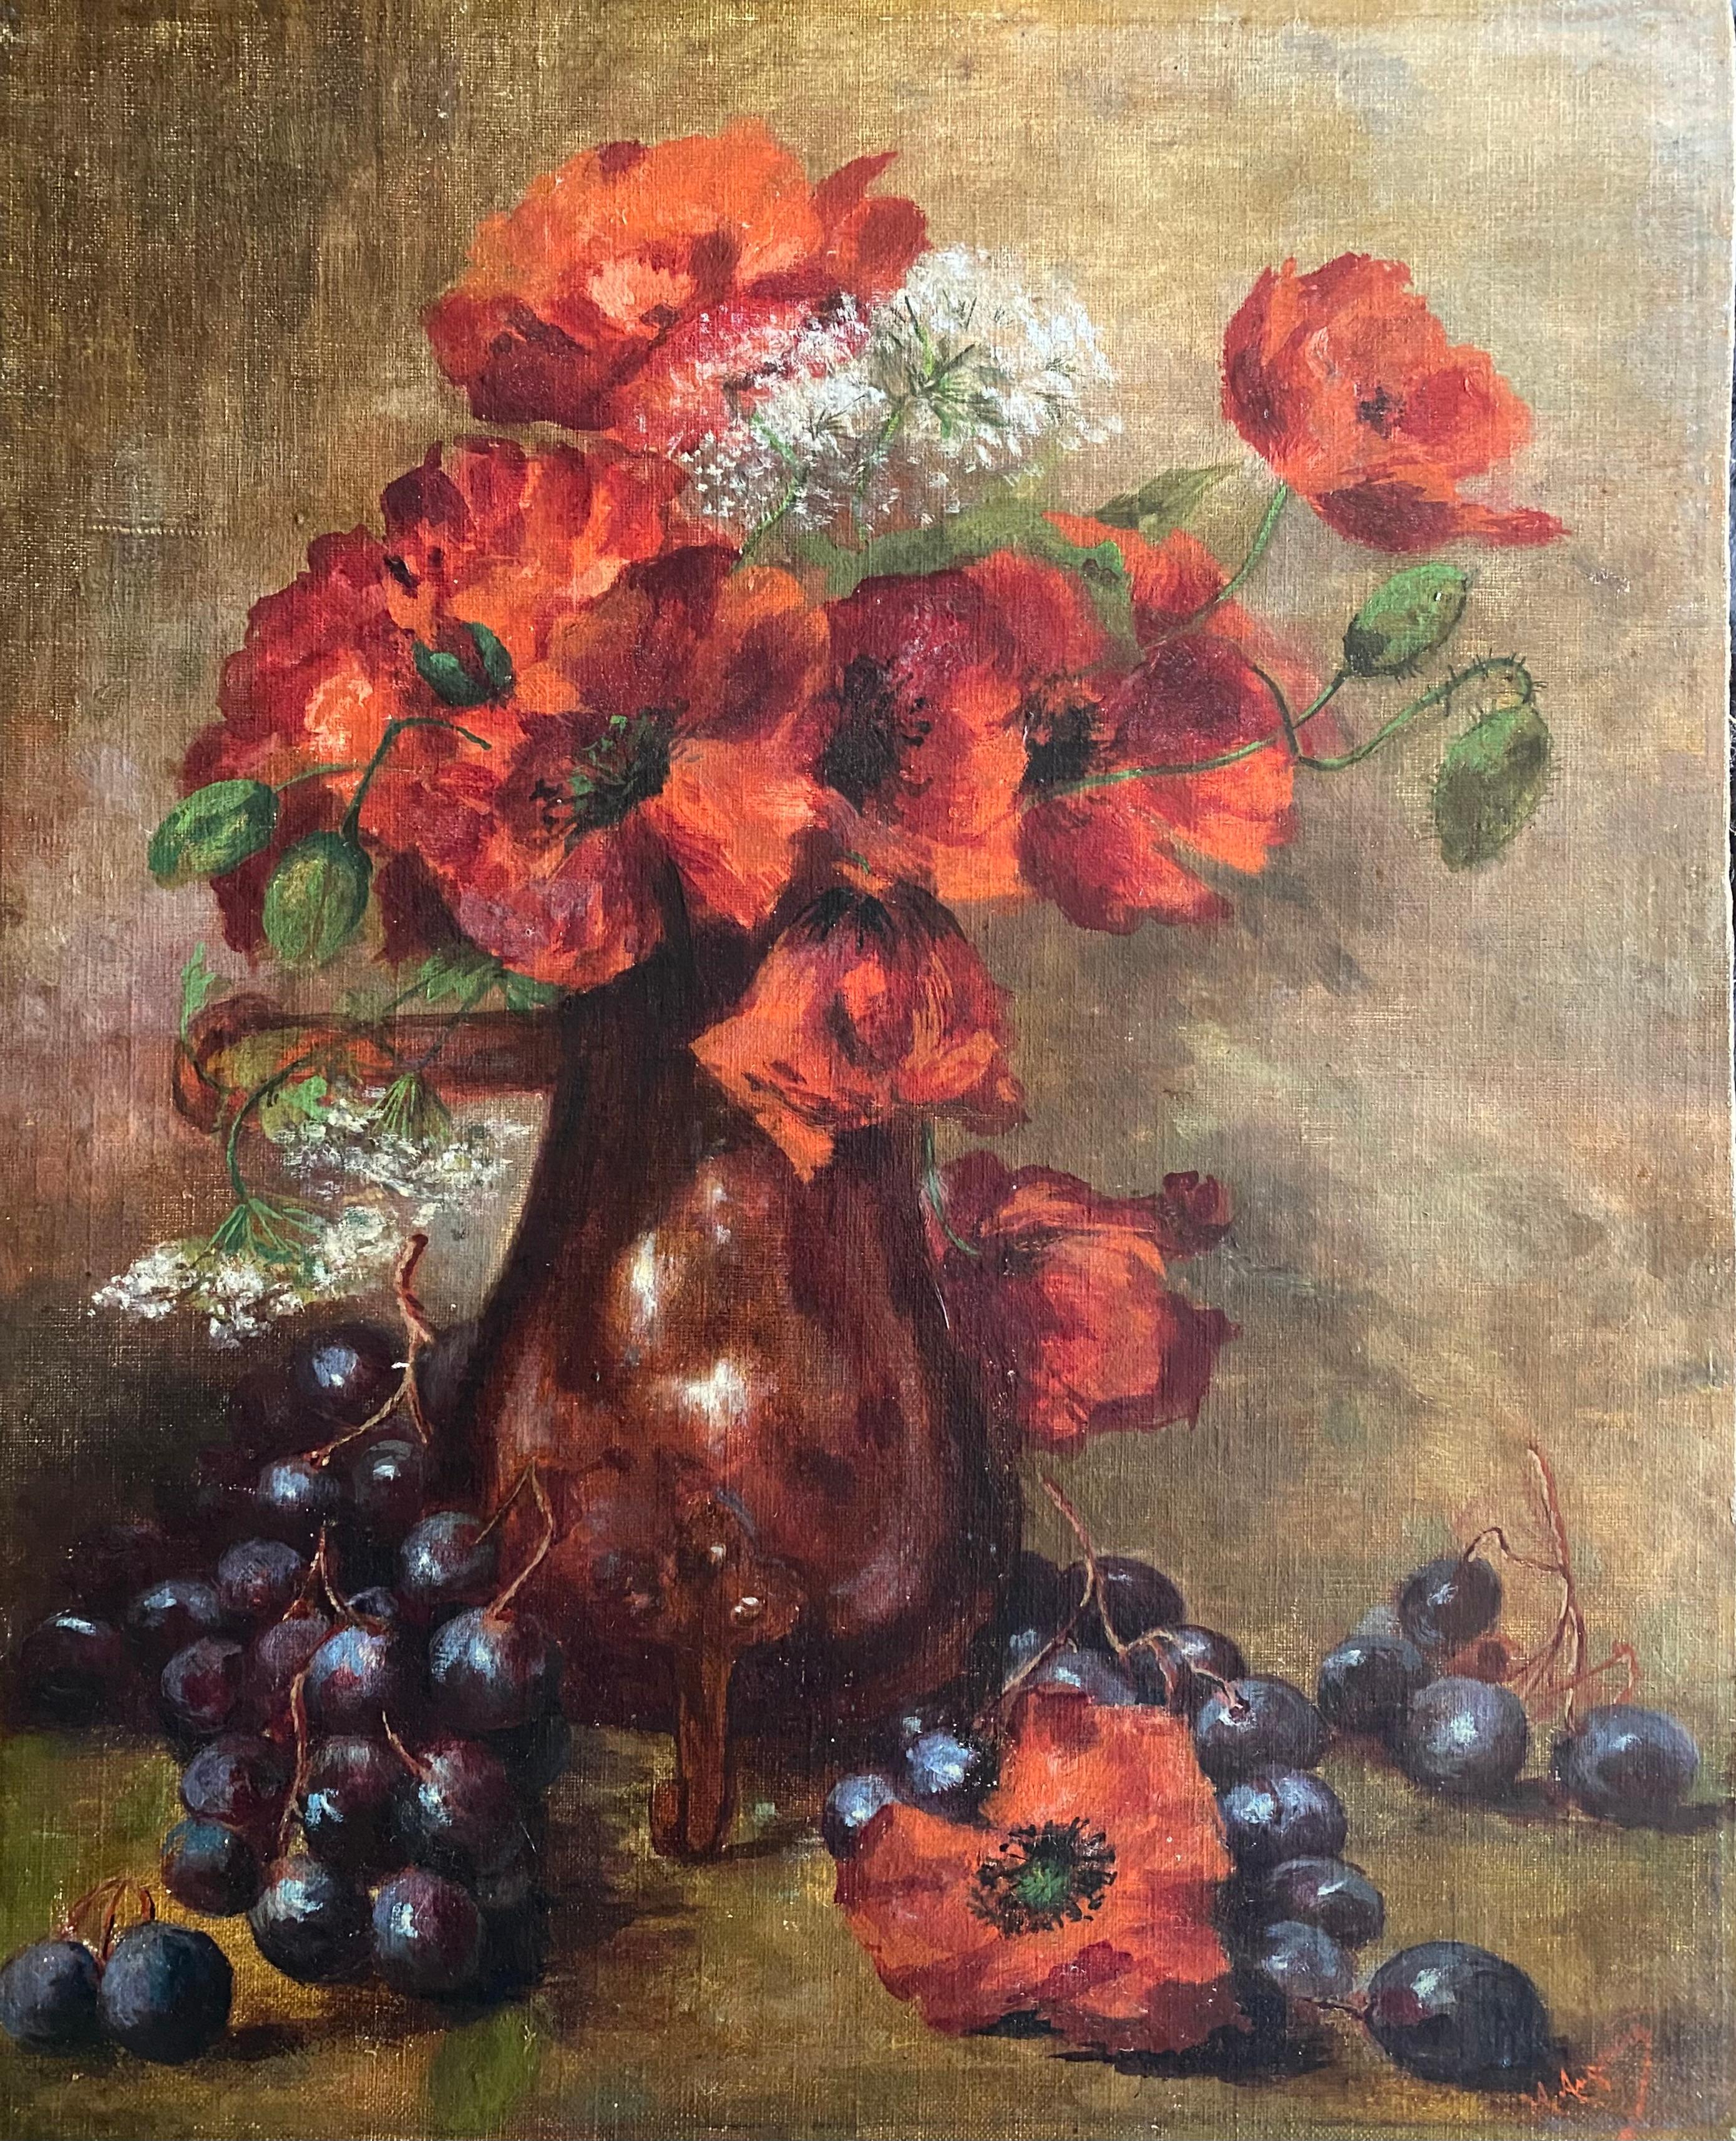 “Red Poppies and Grapes” - Painting by Unknown